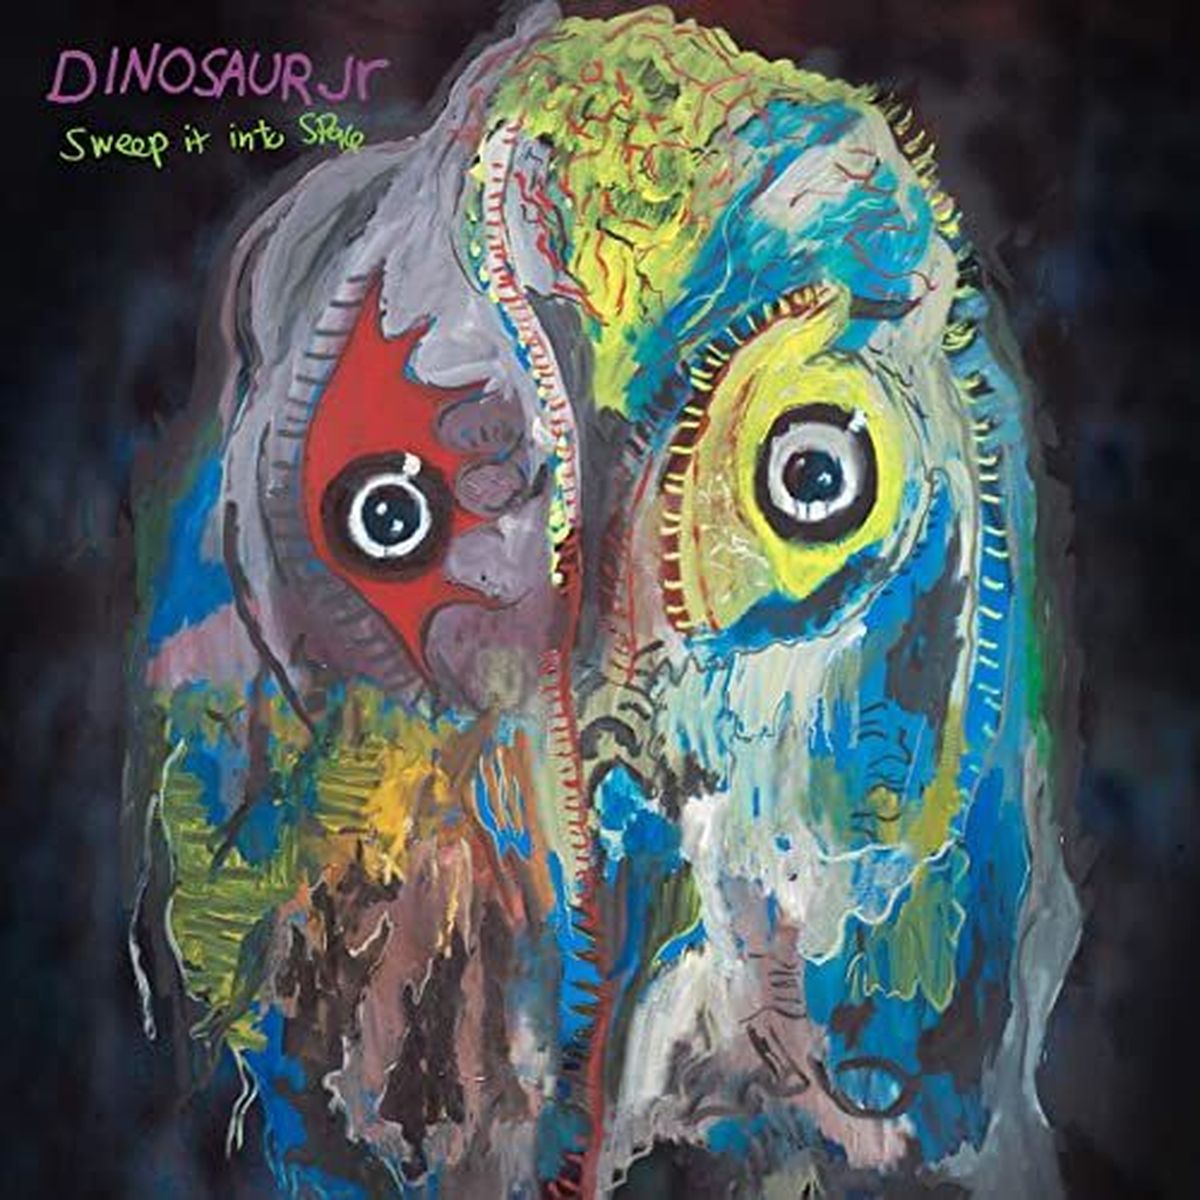 Dinosaur Jr.’s new album is titled “Sweep It Into Space.”  (Courtesy)